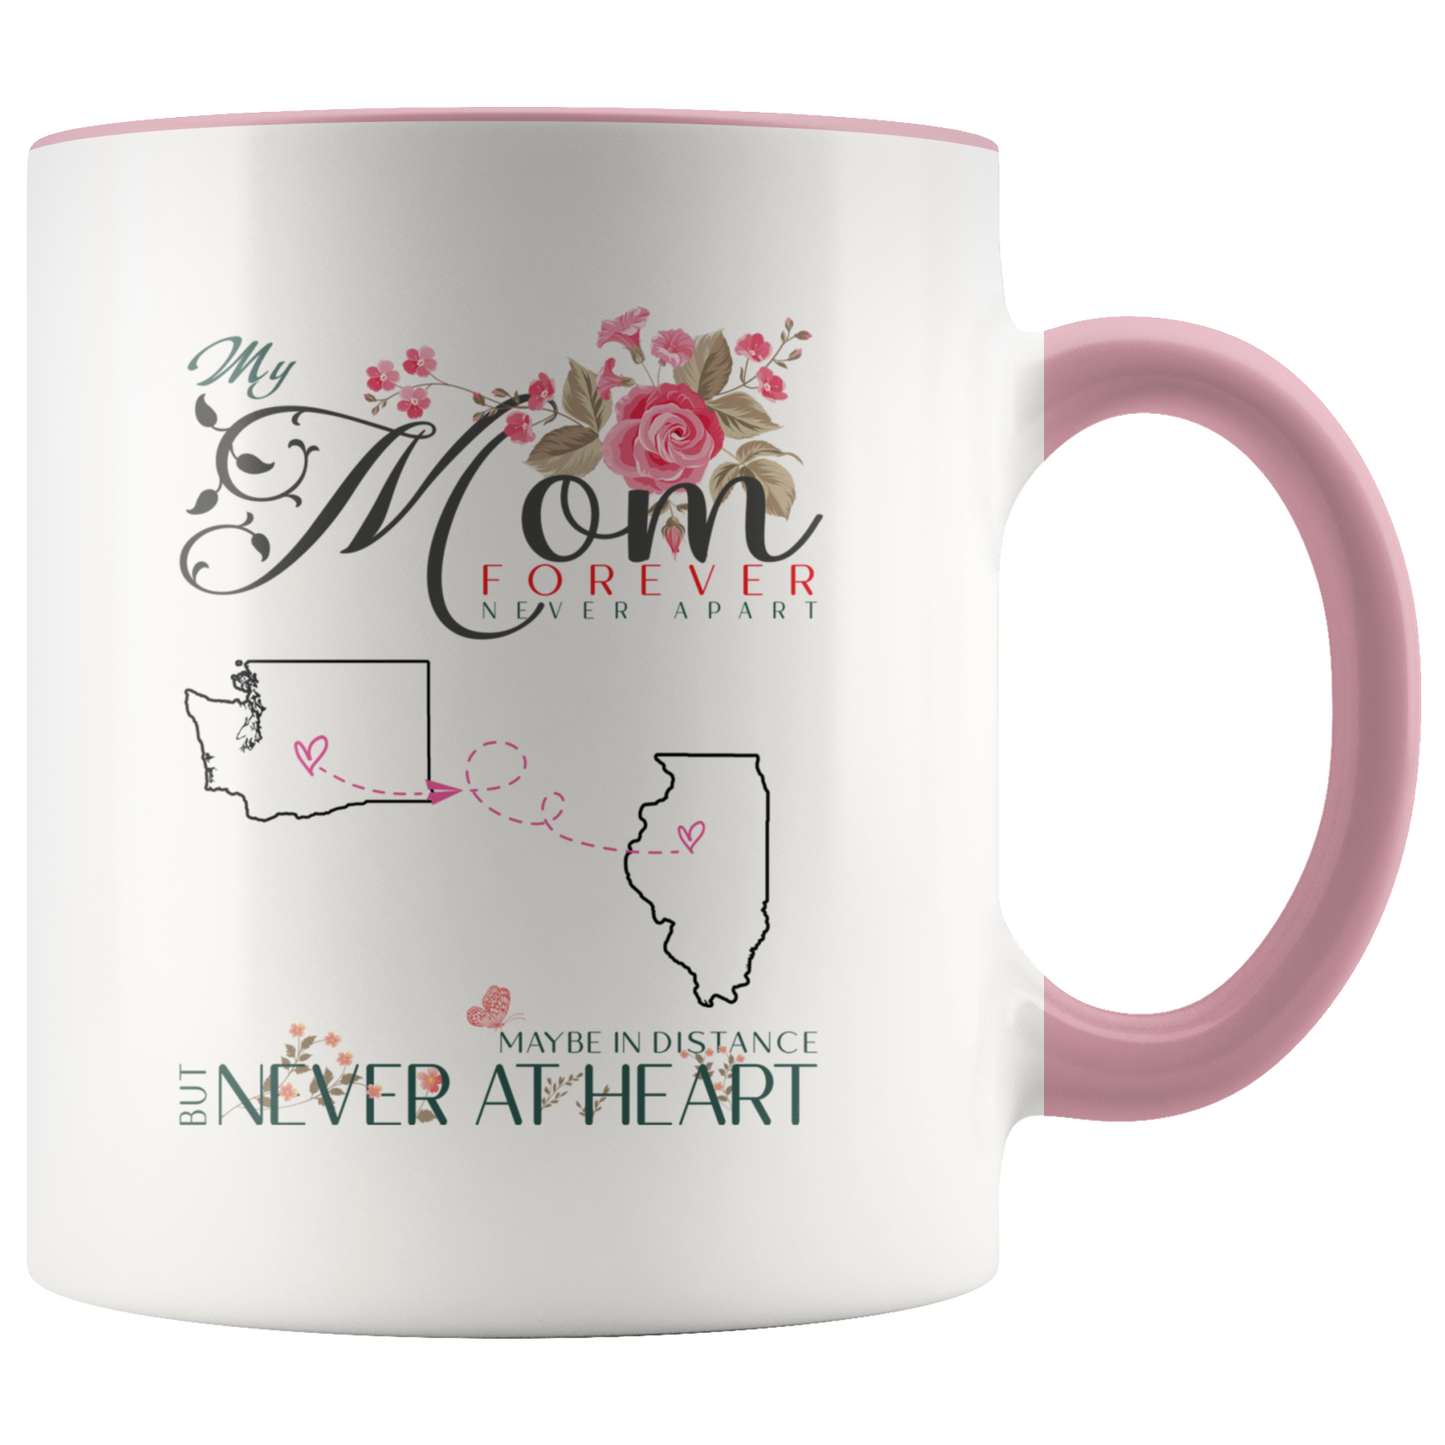 M-20321571-sp-23673 - [ Washington | Illinois ]Personalized Mothers Day Coffee Mug - My Mom Forever Never A